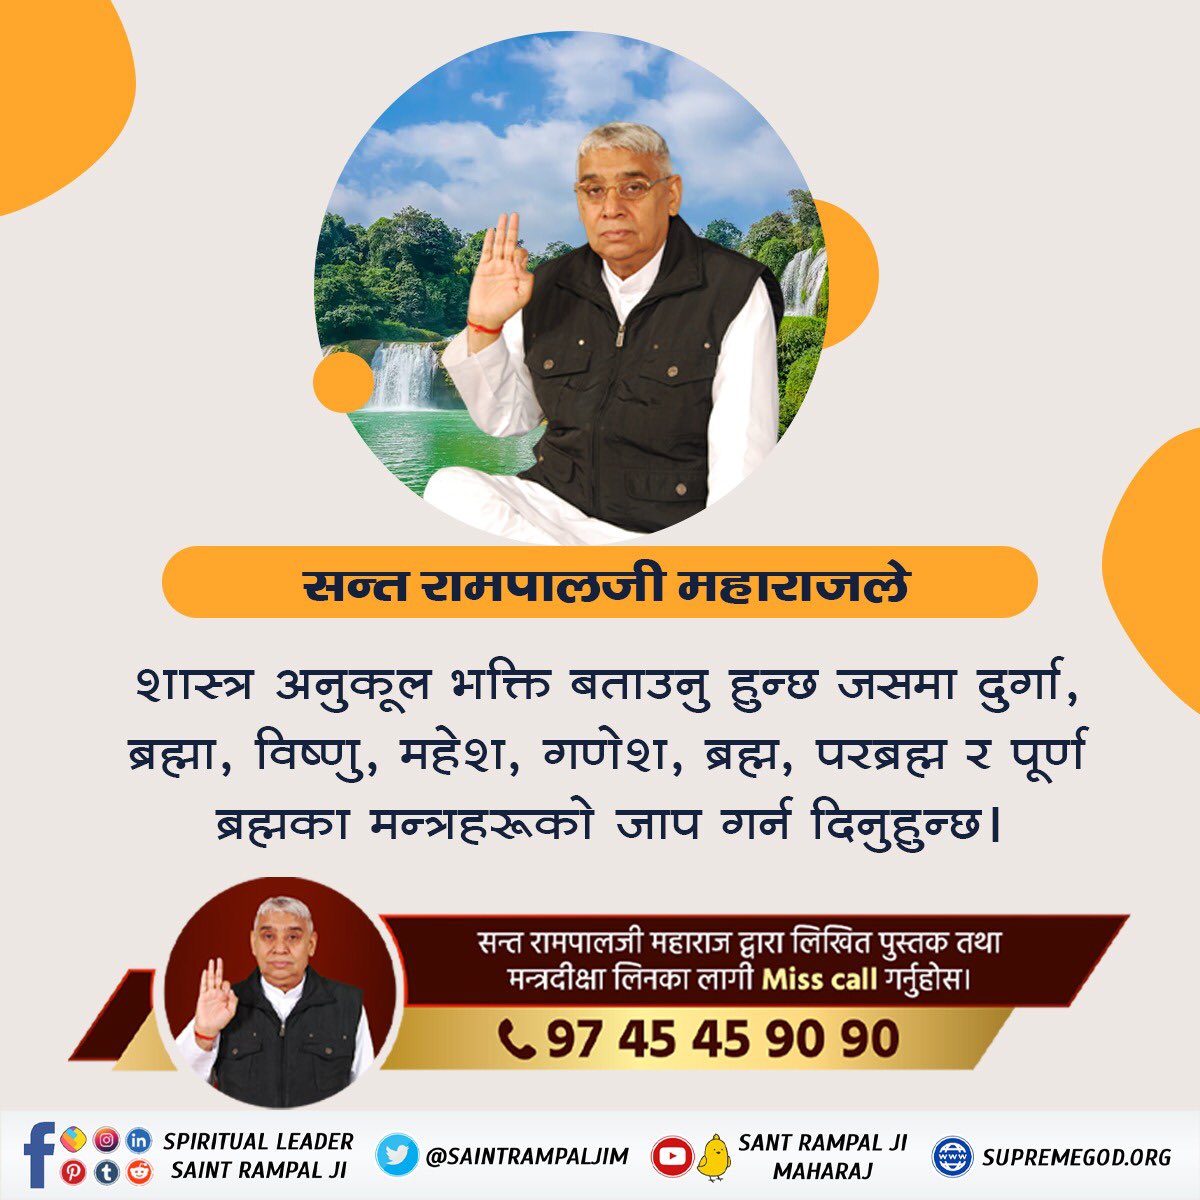 #तिनै_देवता_कमलमा Sant Rampal Ji Maharaj does not make you leave the Sadhana of Ganesh Ji. He says that Kavirdev is the Supreme God. He also gives proofs from our holy scriptures like Shrimad Bhagavad Gita and Vedas to confirm his statement.